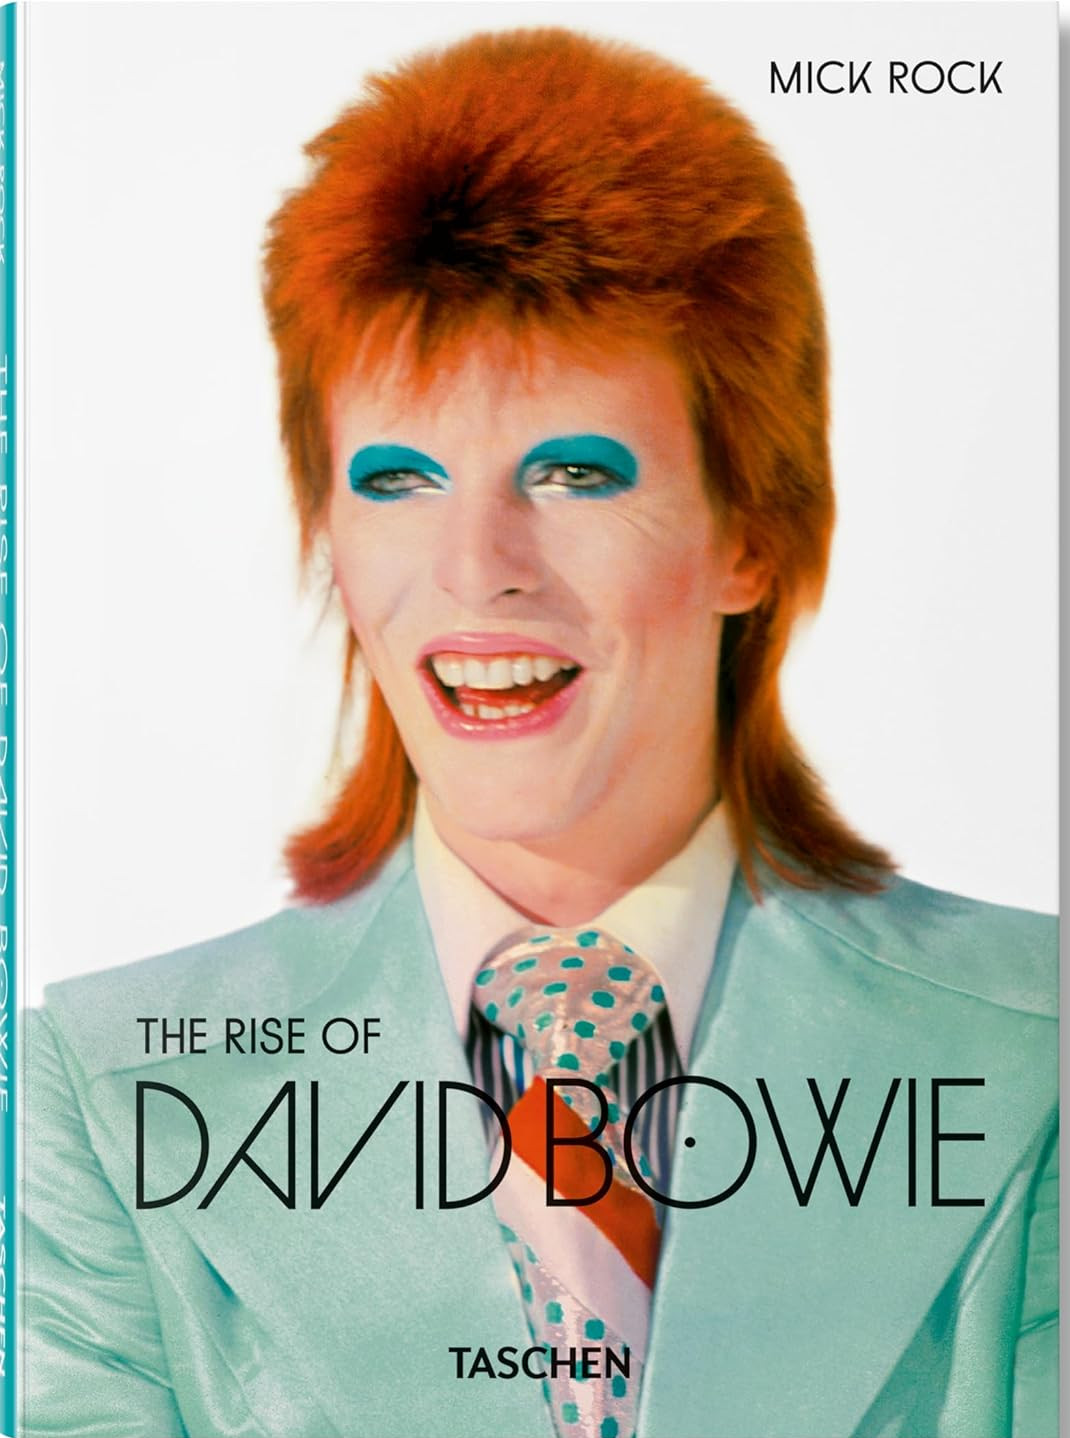 Publisher Taschen - Mick Rock. The Rise of David Bowie. 1972-1973 - Barney Hoskyns